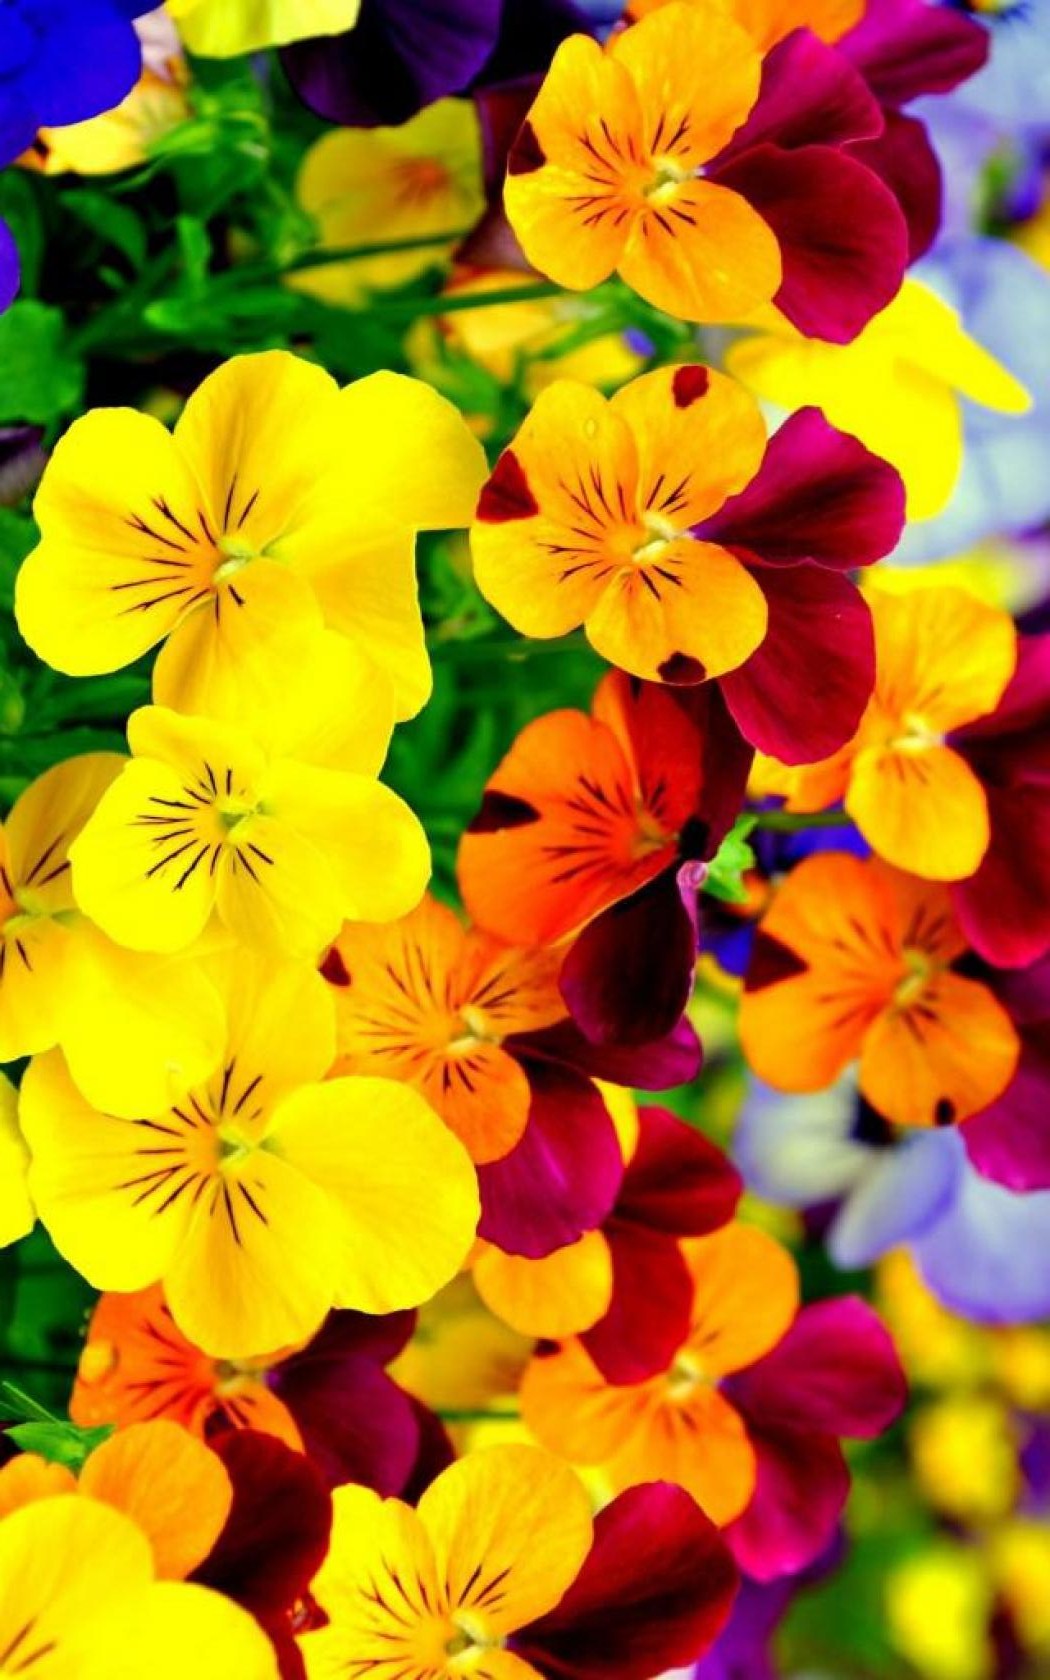 Bright Flowers Wallpaper Iphone Resolution - Bright Flower Wallpaper Iphone - HD Wallpaper 